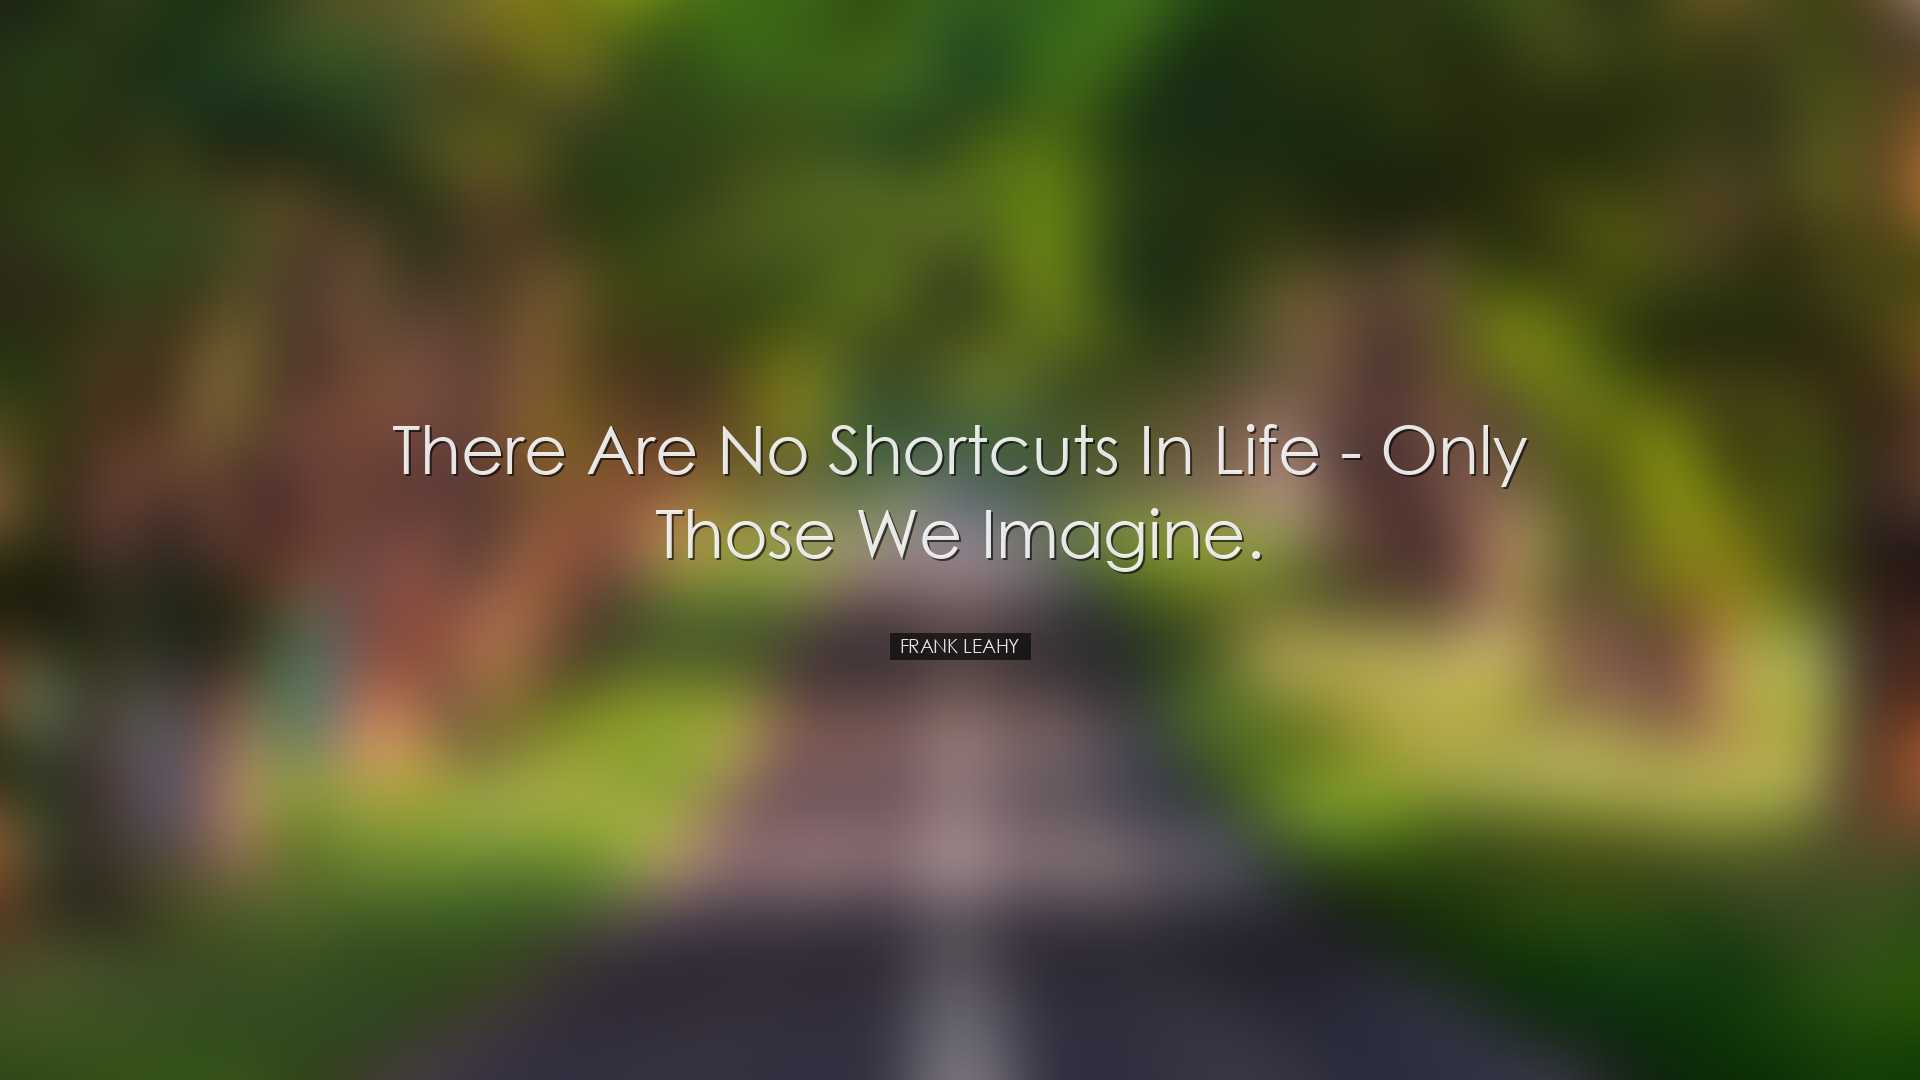 There are no shortcuts in life - only those we imagine. - Frank Le